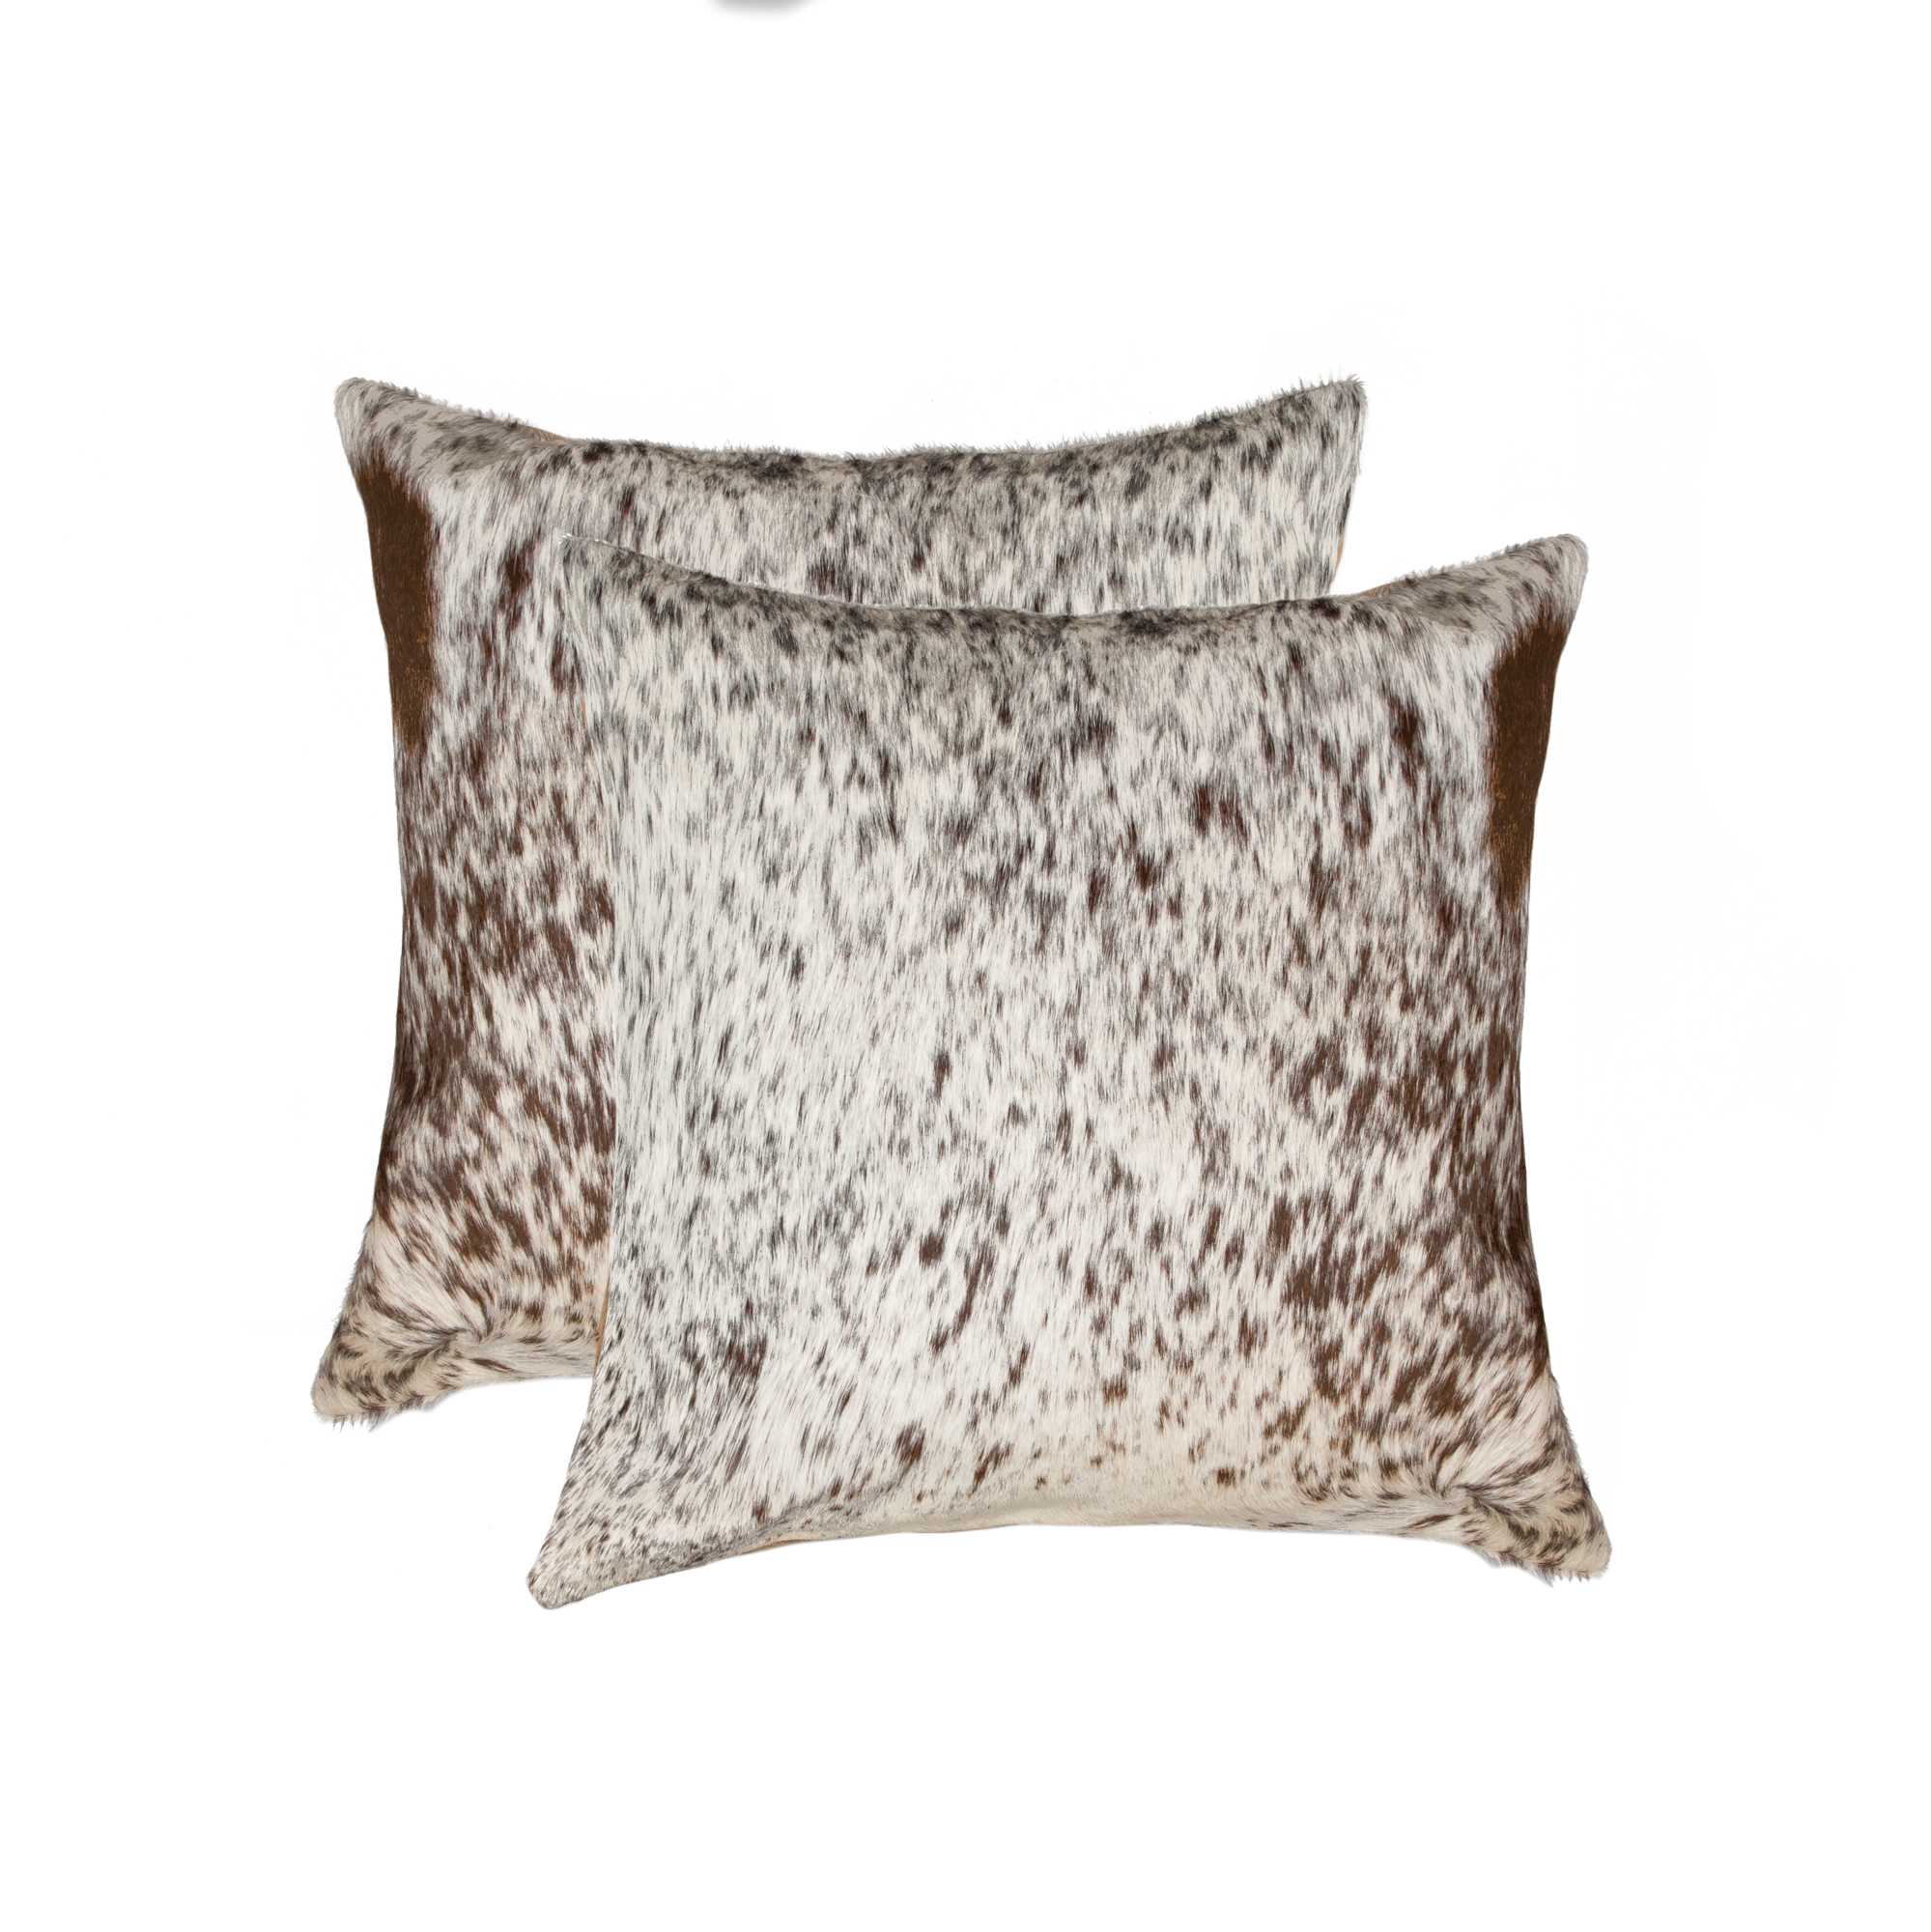 18" x 18" x 5" Salt And Pepper, Chocolate And White Cowhide - Pillow 2-Pack